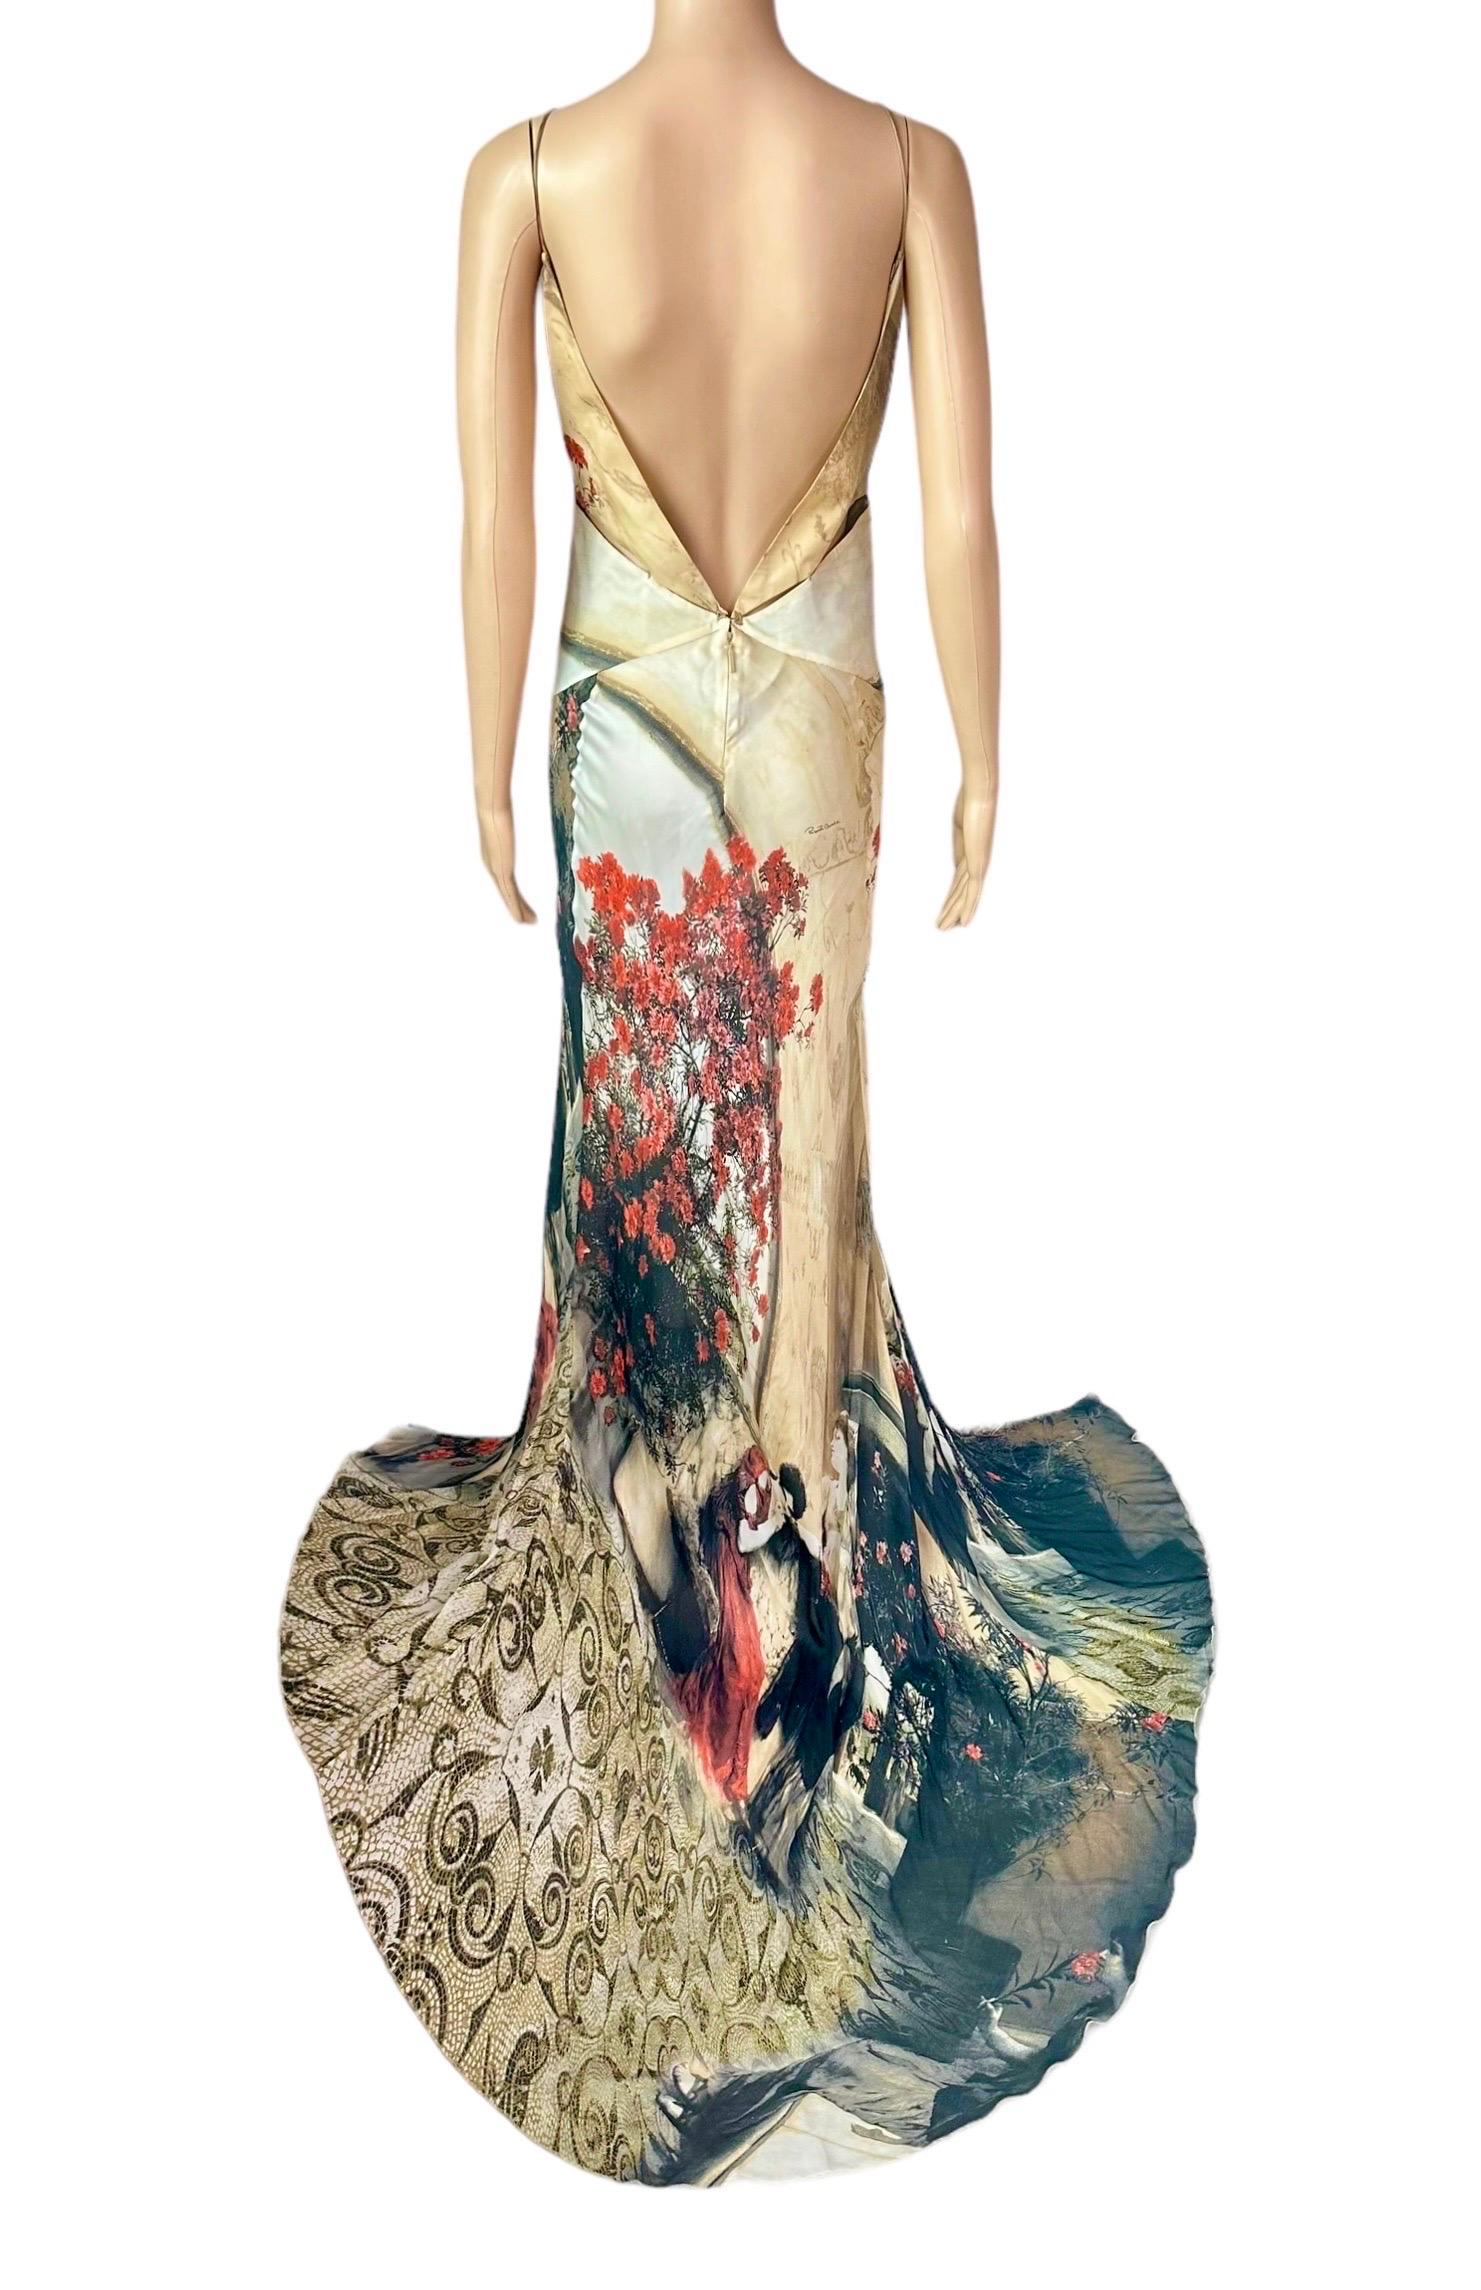 Roberto Cavalli S/S 2004 Runway Cutout High Slit Silk Slip Evening Dress Gown In Excellent Condition For Sale In Naples, FL